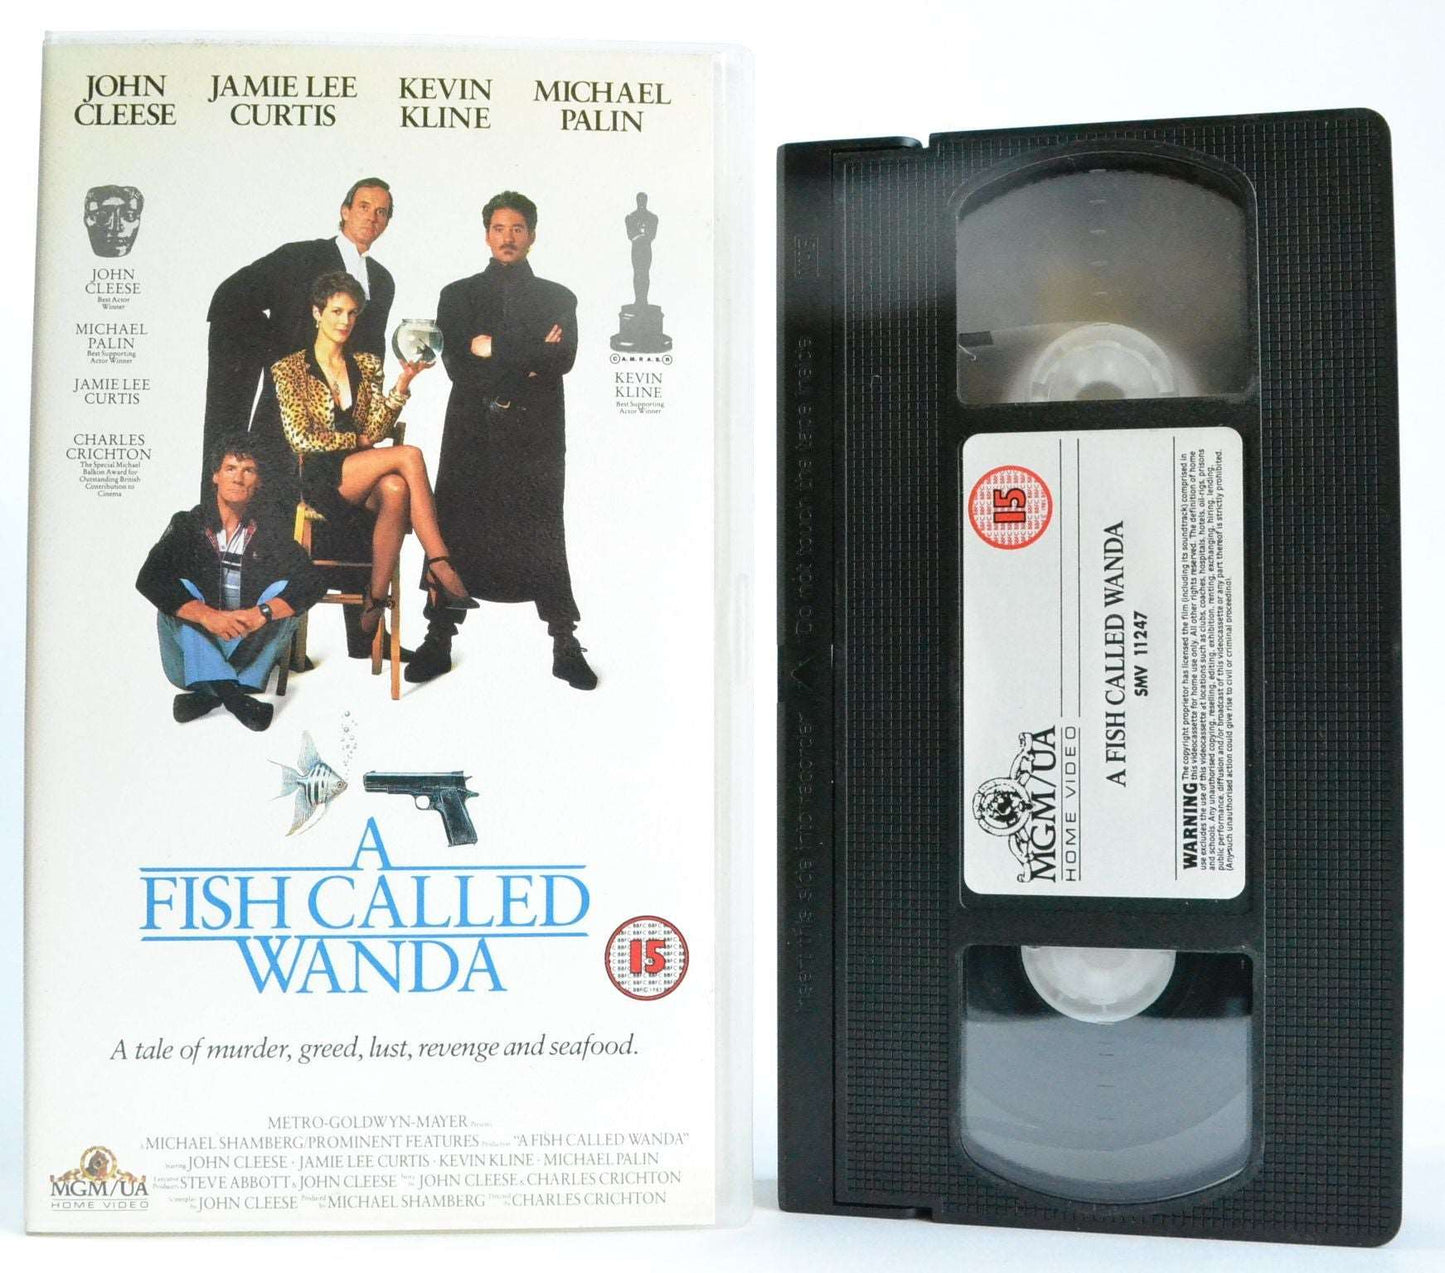 A Fish Called Wanda: Cleese Curtis Kline Palin (1988) Acclaimed Comedy - VHS-